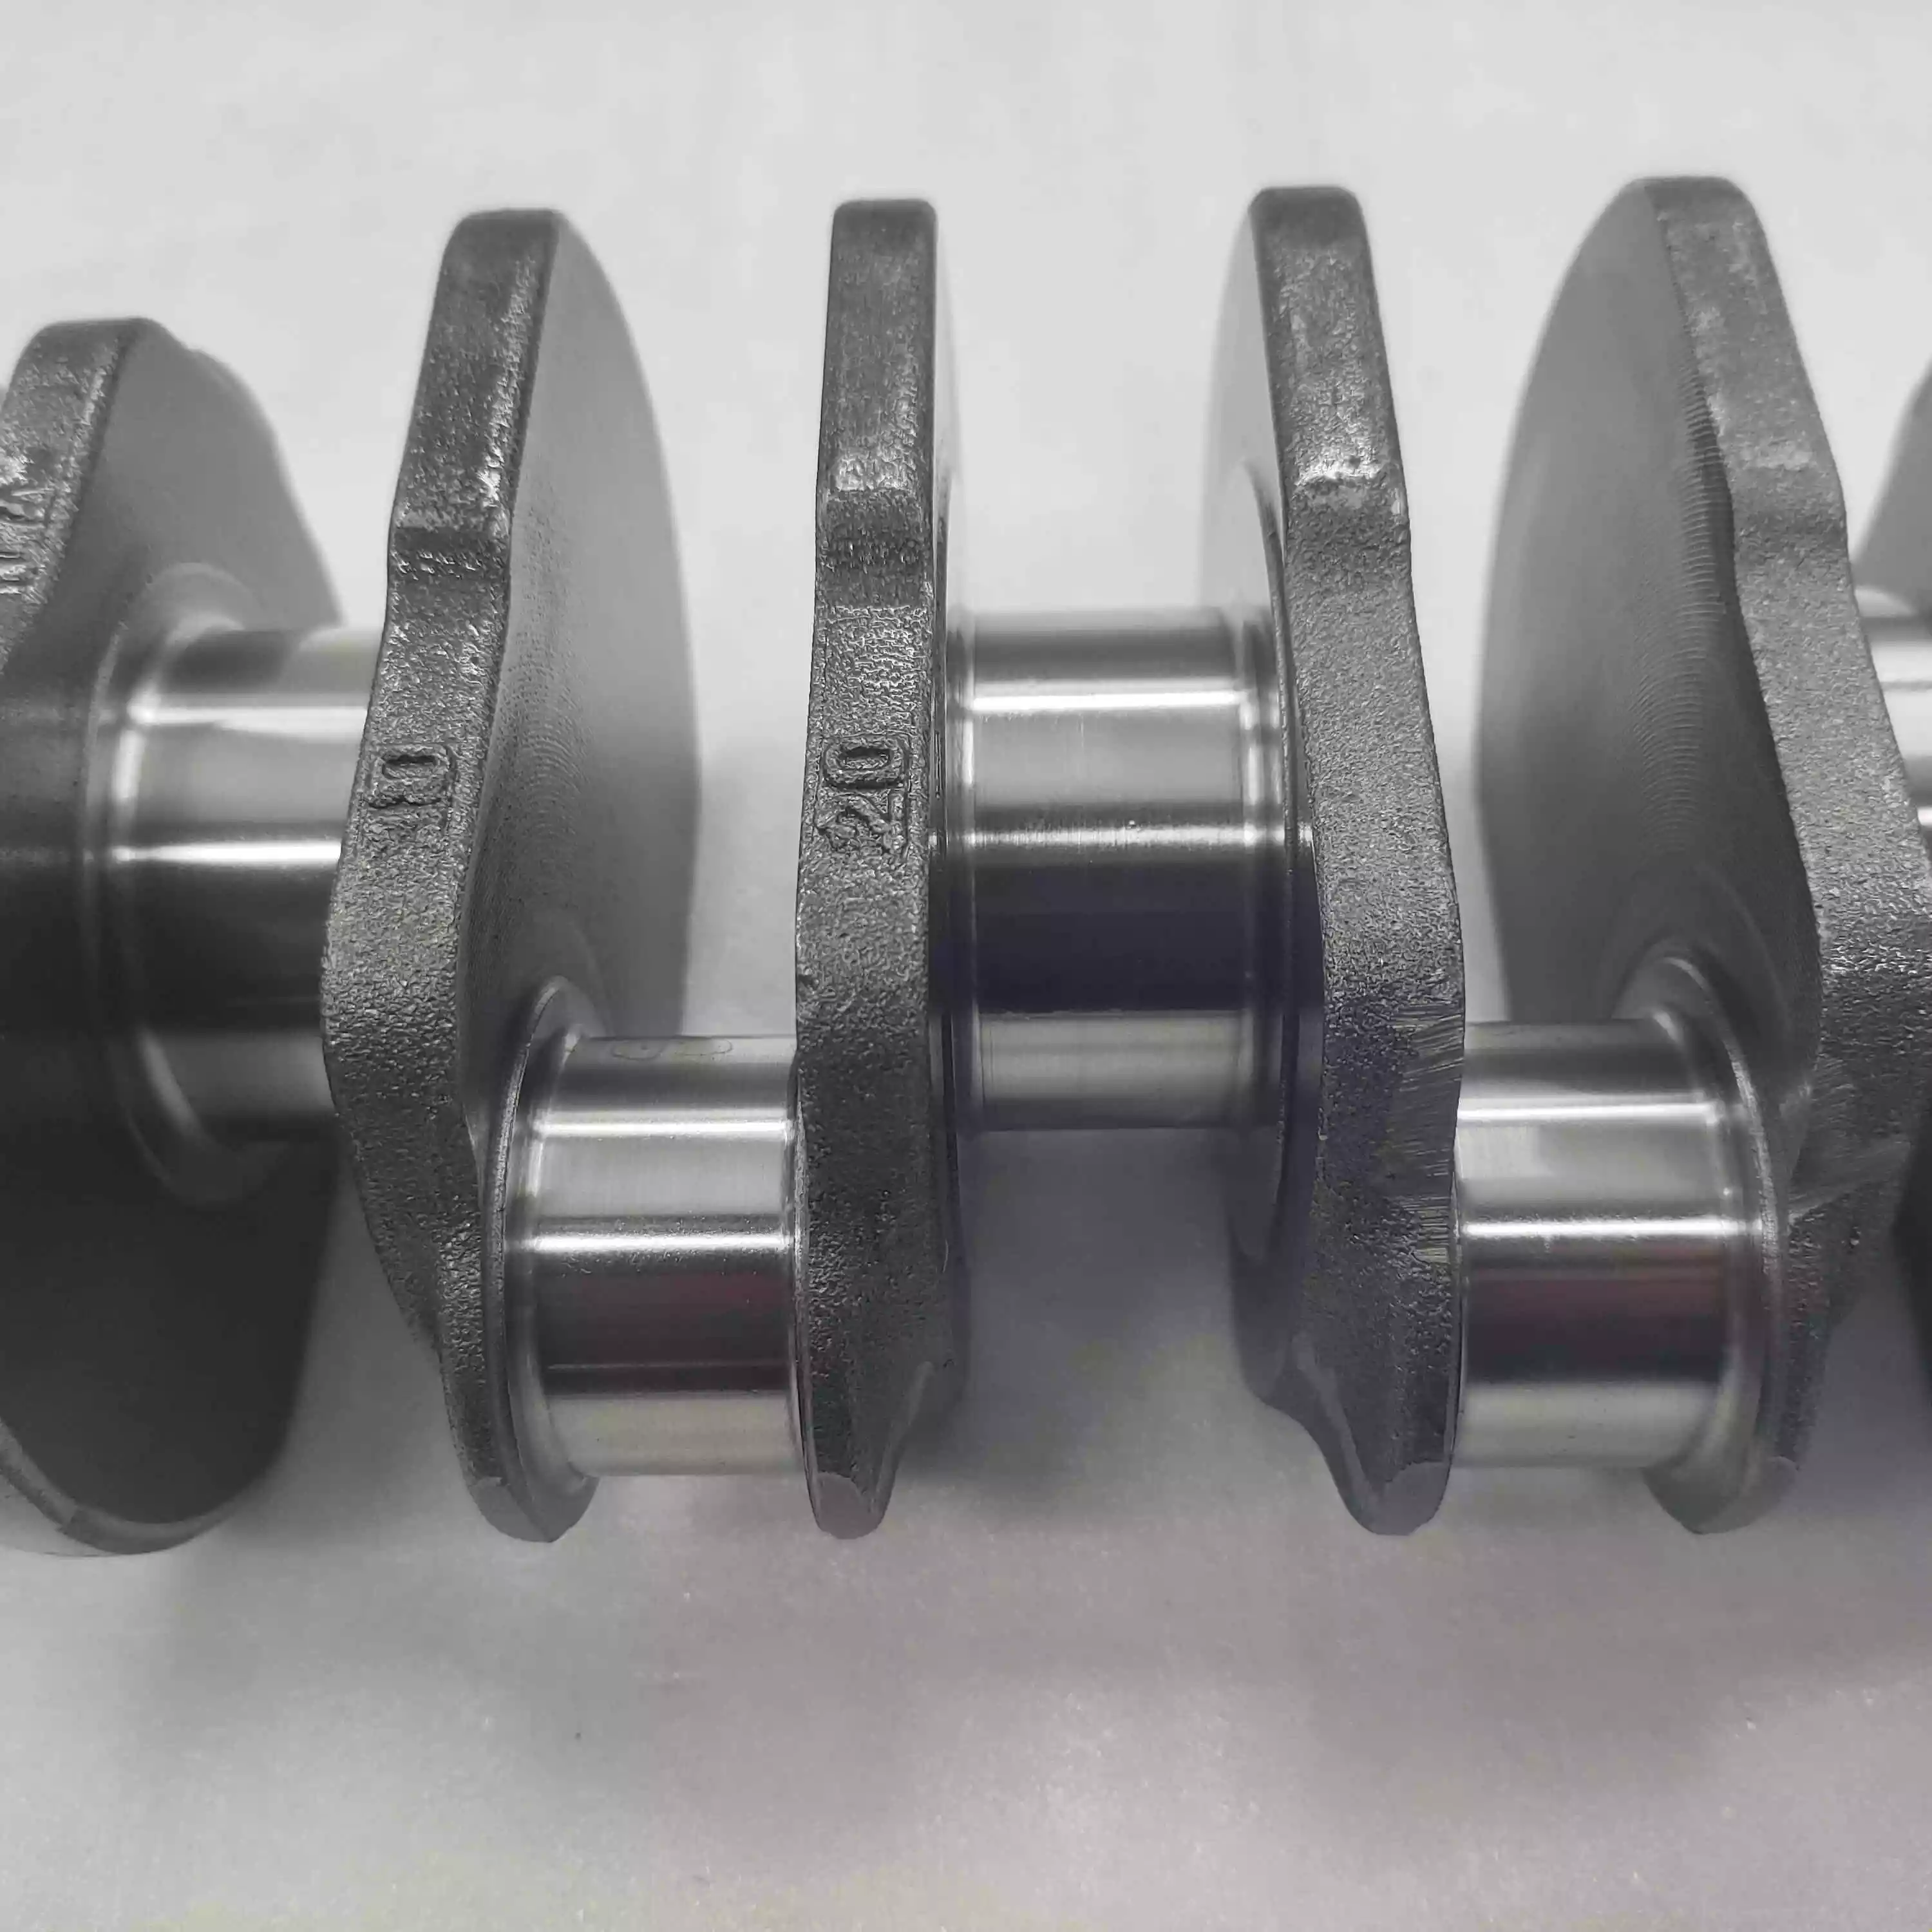 China factory new original motorcycle automobile parts tricycle 800cc water-cooled engine crankshaft high warranty product